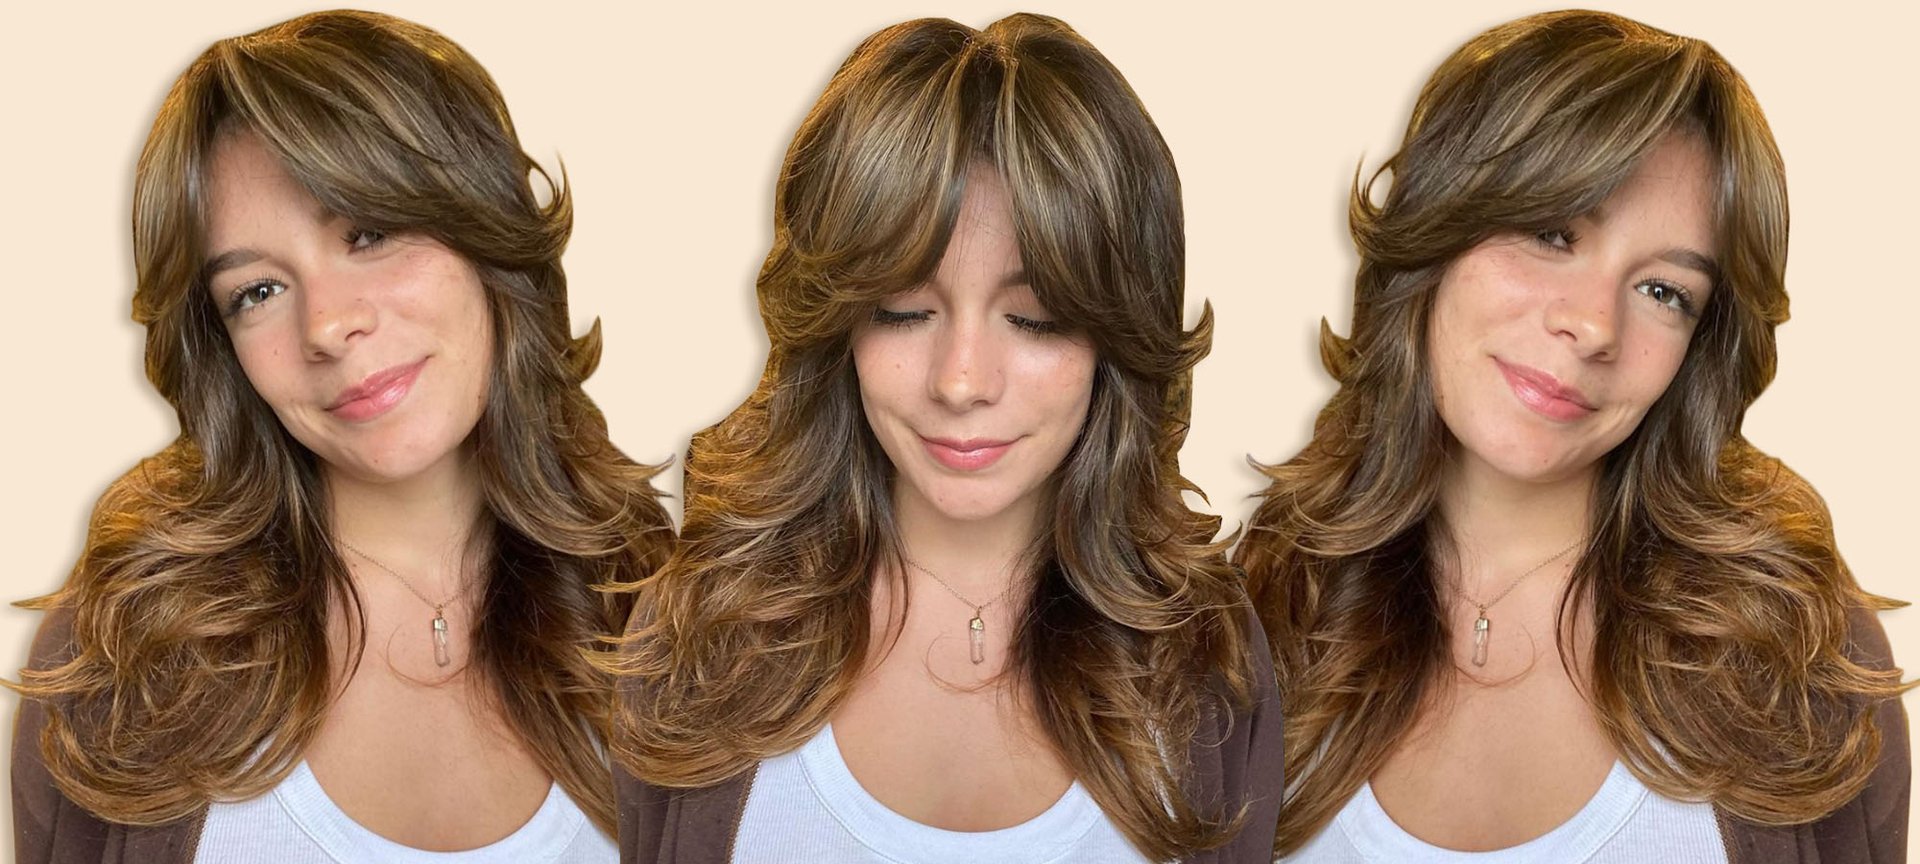 NewFelle - Give your natural hair time to recover while having a great time  with this modern new hairstyle. ✨💯 👉 For more info, visit our website  https://newfelle.com/ #Belinda #Wig #Hairstyle #Hair #